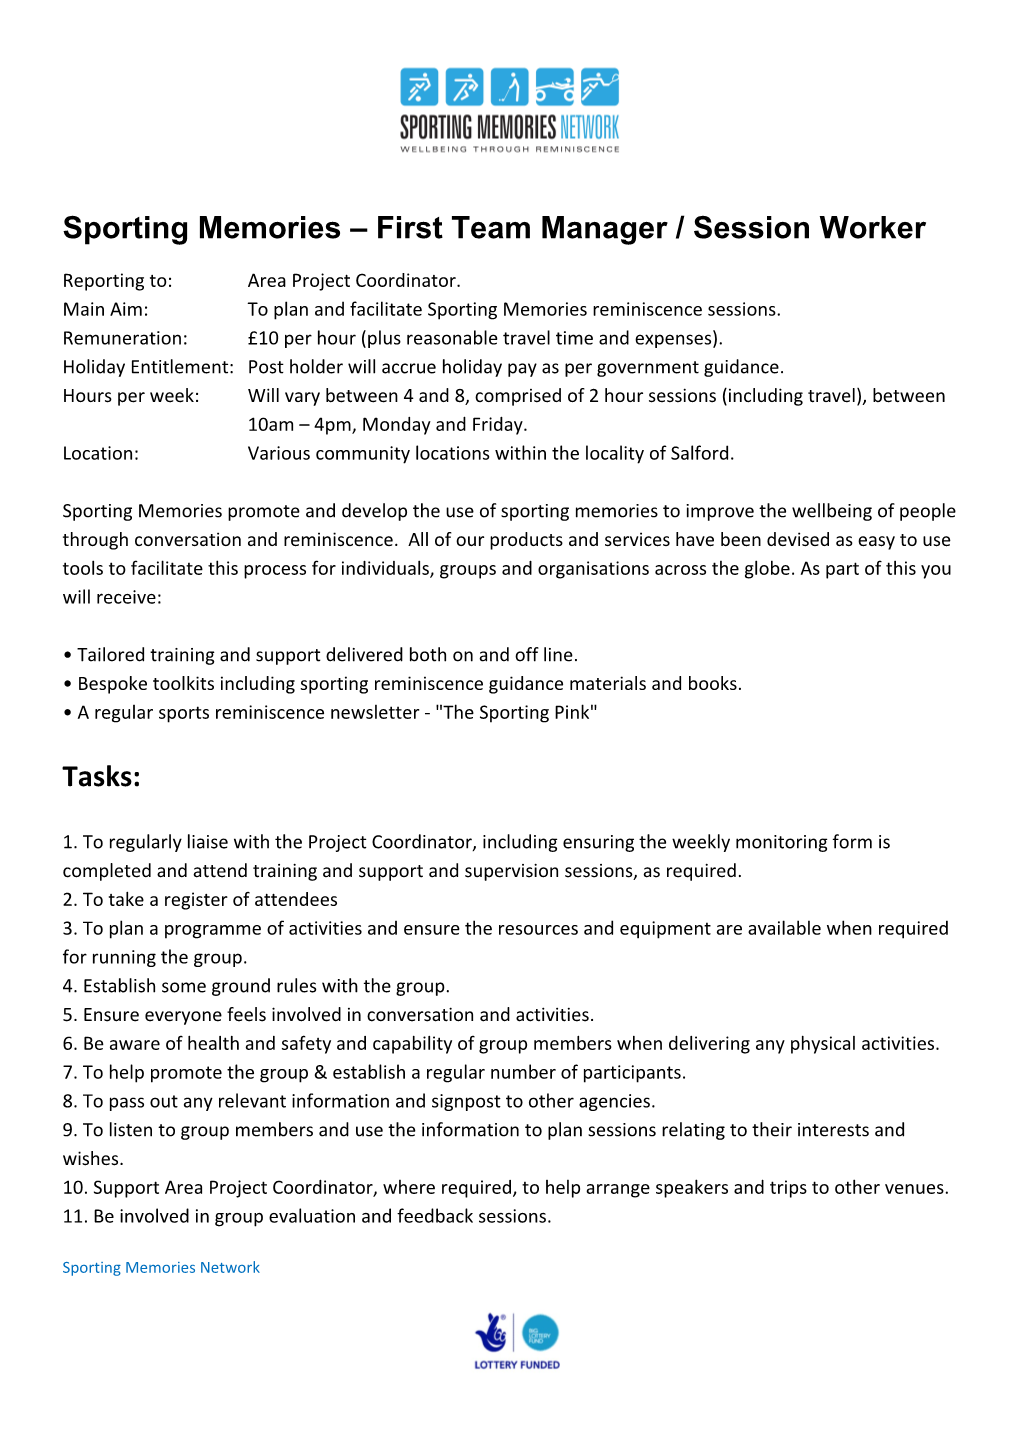 Sporting Memories First Team Manager / Session Worker